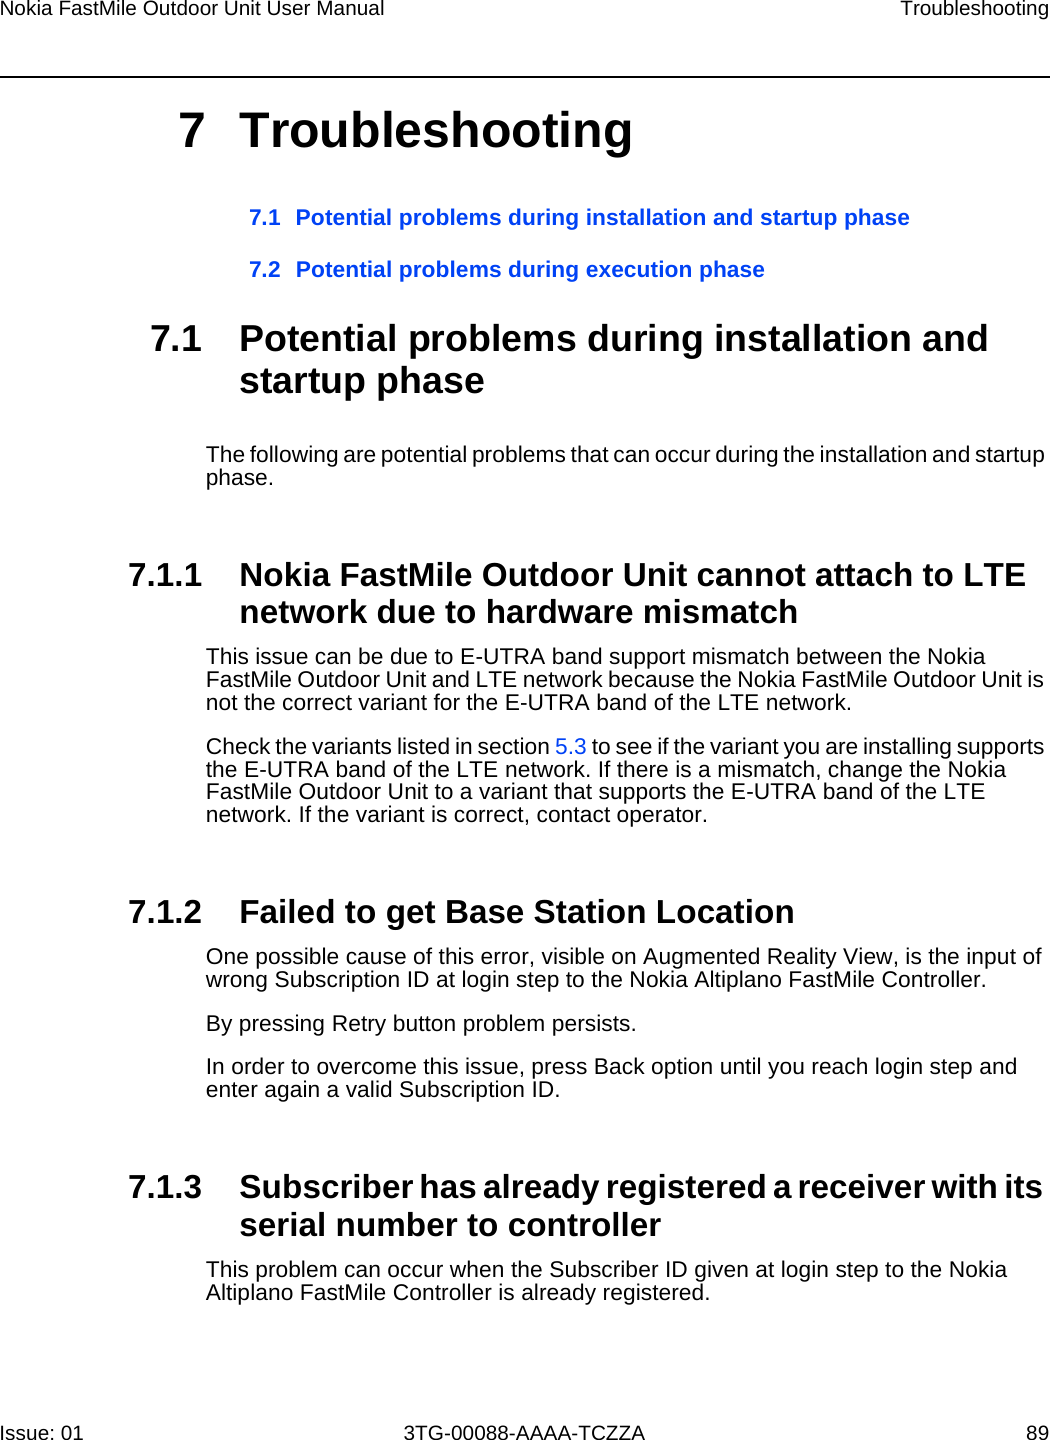 Nokia FastMile Outdoor Unit User Manual TroubleshootingIssue: 01 3TG-00088-AAAA-TCZZA 897 Troubleshooting7.1 Potential problems during installation and startup phase7.2 Potential problems during execution phase7.1 Potential problems during installation and startup phaseThe following are potential problems that can occur during the installation and startup phase.7.1.1 Nokia FastMile Outdoor Unit cannot attach to LTE network due to hardware mismatchThis issue can be due to E-UTRA band support mismatch between the Nokia FastMile Outdoor Unit and LTE network because the Nokia FastMile Outdoor Unit is not the correct variant for the E-UTRA band of the LTE network. Check the variants listed in section 5.3 to see if the variant you are installing supports the E-UTRA band of the LTE network. If there is a mismatch, change the Nokia FastMile Outdoor Unit to a variant that supports the E-UTRA band of the LTE network. If the variant is correct, contact operator.7.1.2 Failed to get Base Station LocationOne possible cause of this error, visible on Augmented Reality View, is the input of wrong Subscription ID at login step to the Nokia Altiplano FastMile Controller.By pressing Retry button problem persists.In order to overcome this issue, press Back option until you reach login step and enter again a valid Subscription ID.7.1.3 Subscriber has already registered a receiver with its serial number to controllerThis problem can occur when the Subscriber ID given at login step to the Nokia Altiplano FastMile Controller is already registered. 